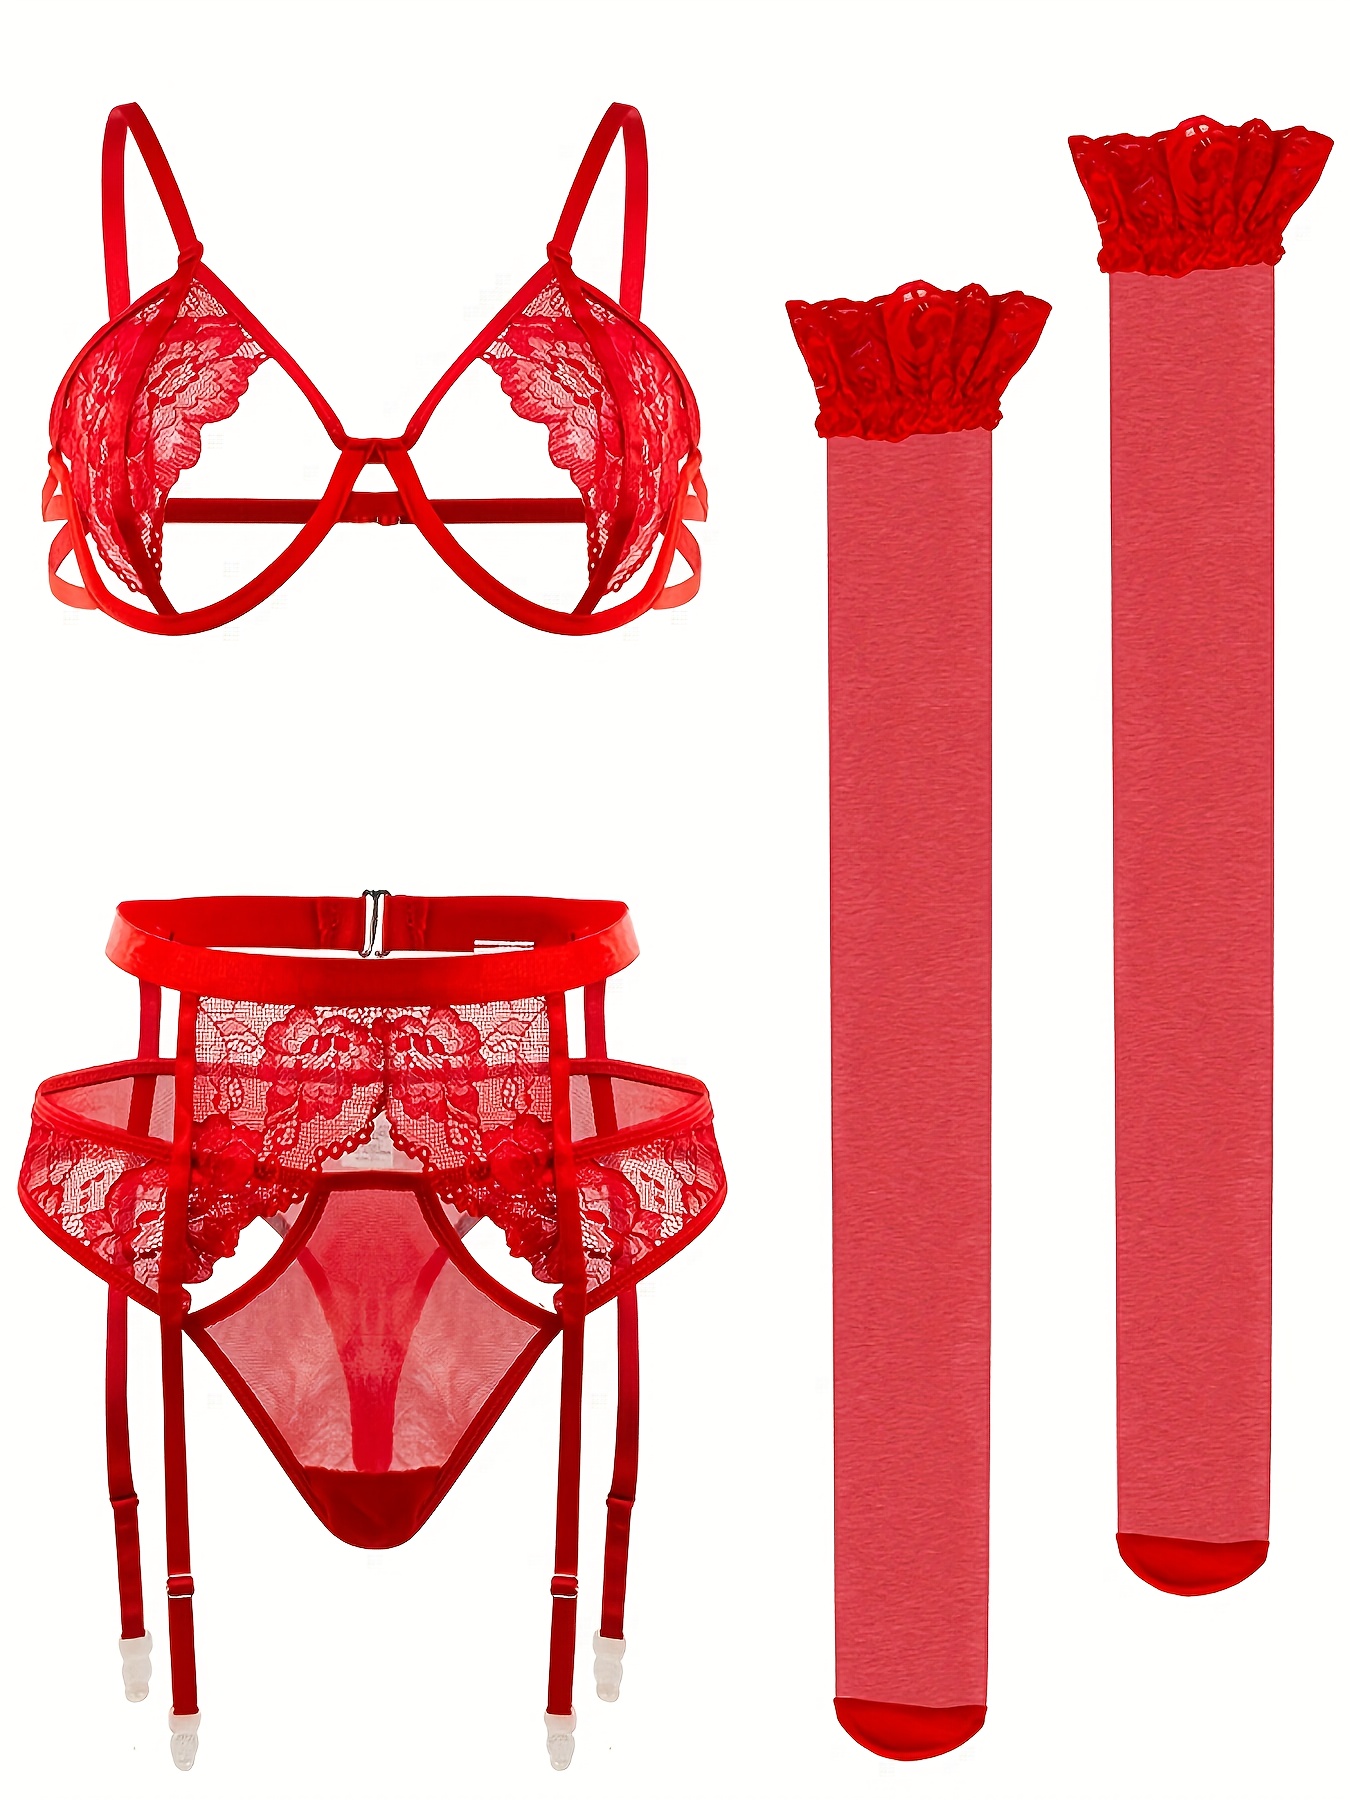 Sexy Red Chain Linked Lingerie Set with Plunge Bra, Garter Belt, G-String,  and Leg Rings - Seductive Women's Underwear for a Bold and Confident Look